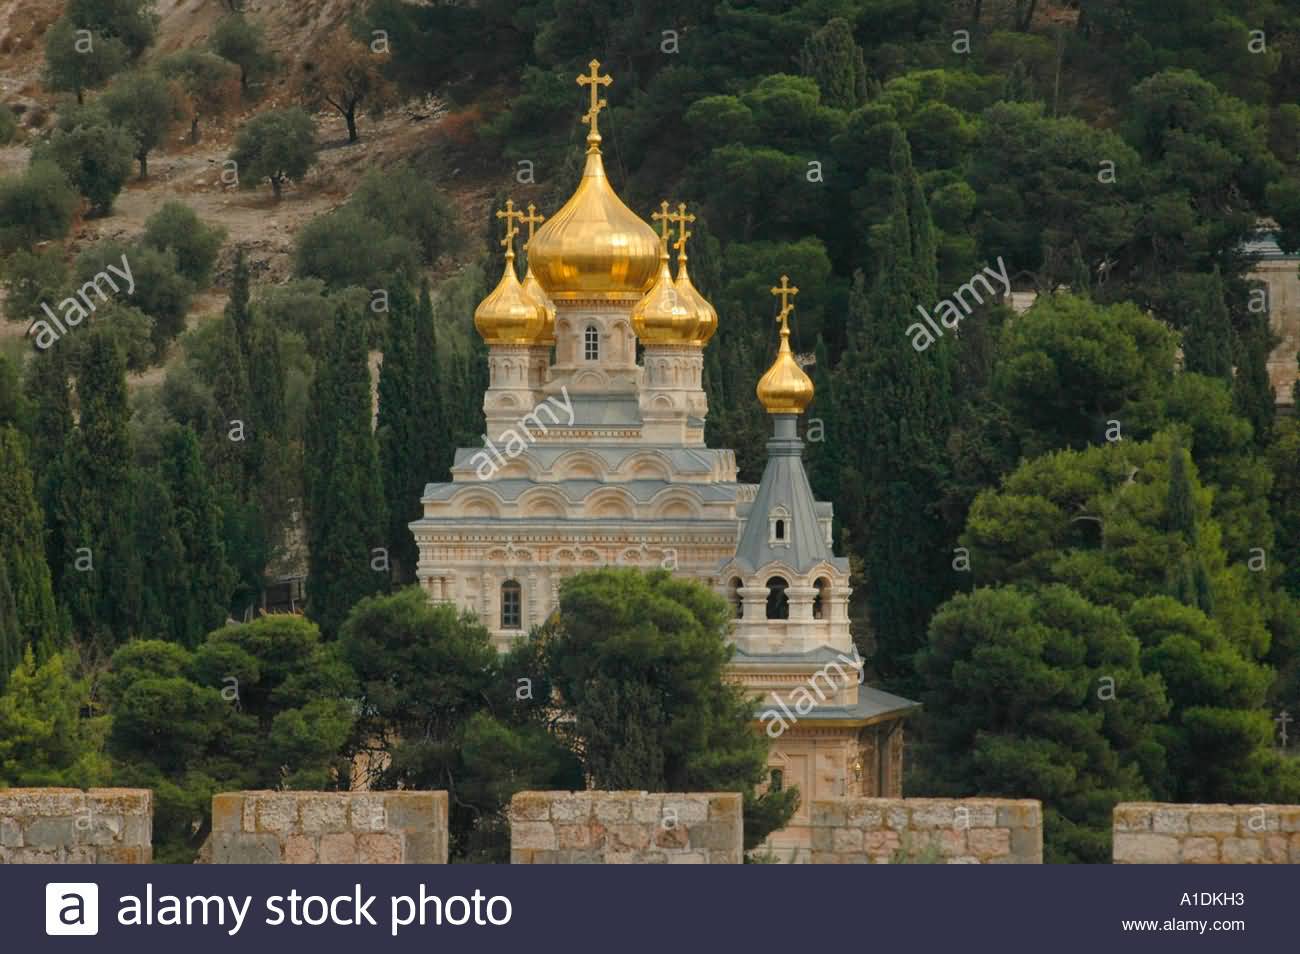 The Russian Orthodox Church Of Saint Mary Magdalene In Jerusalem